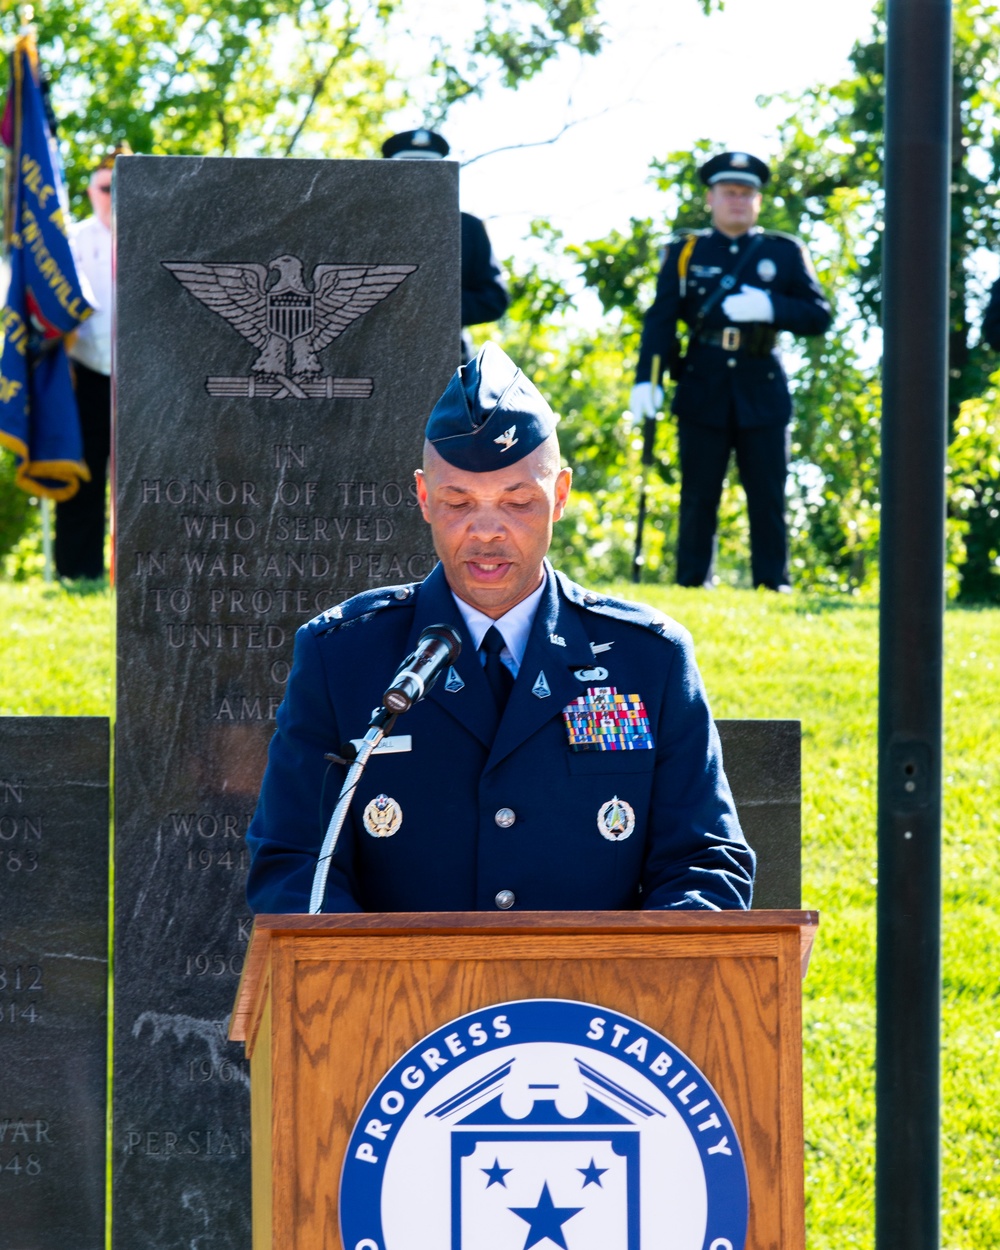 National Space Intelligence Center commander speaks at Memorial Day ceremony